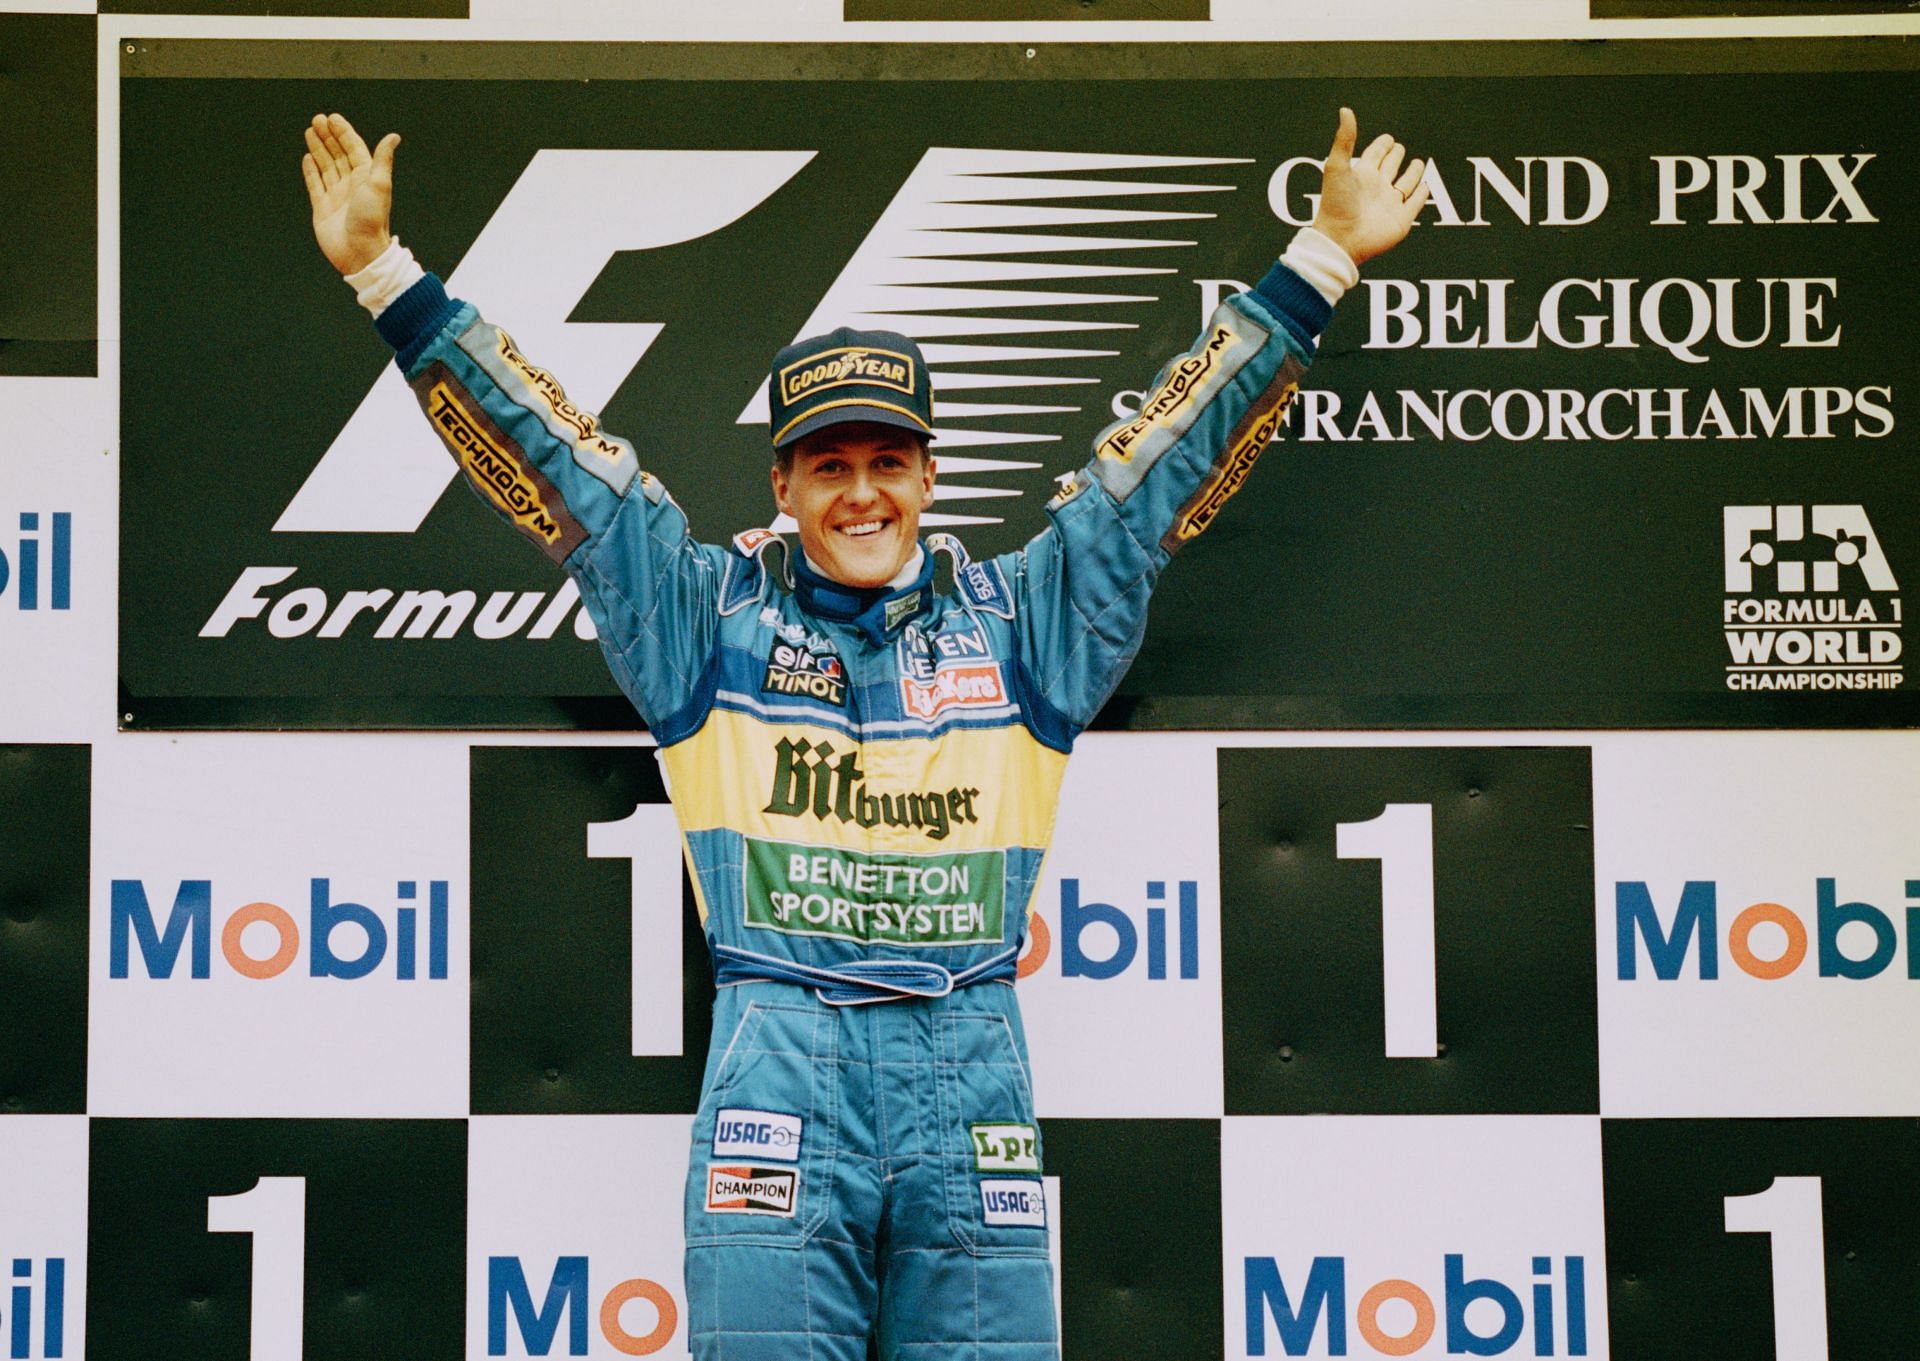 Schumacher celebrating his win during the 1995 Belgian GP (Photo by Ben Radford/Getty Images)